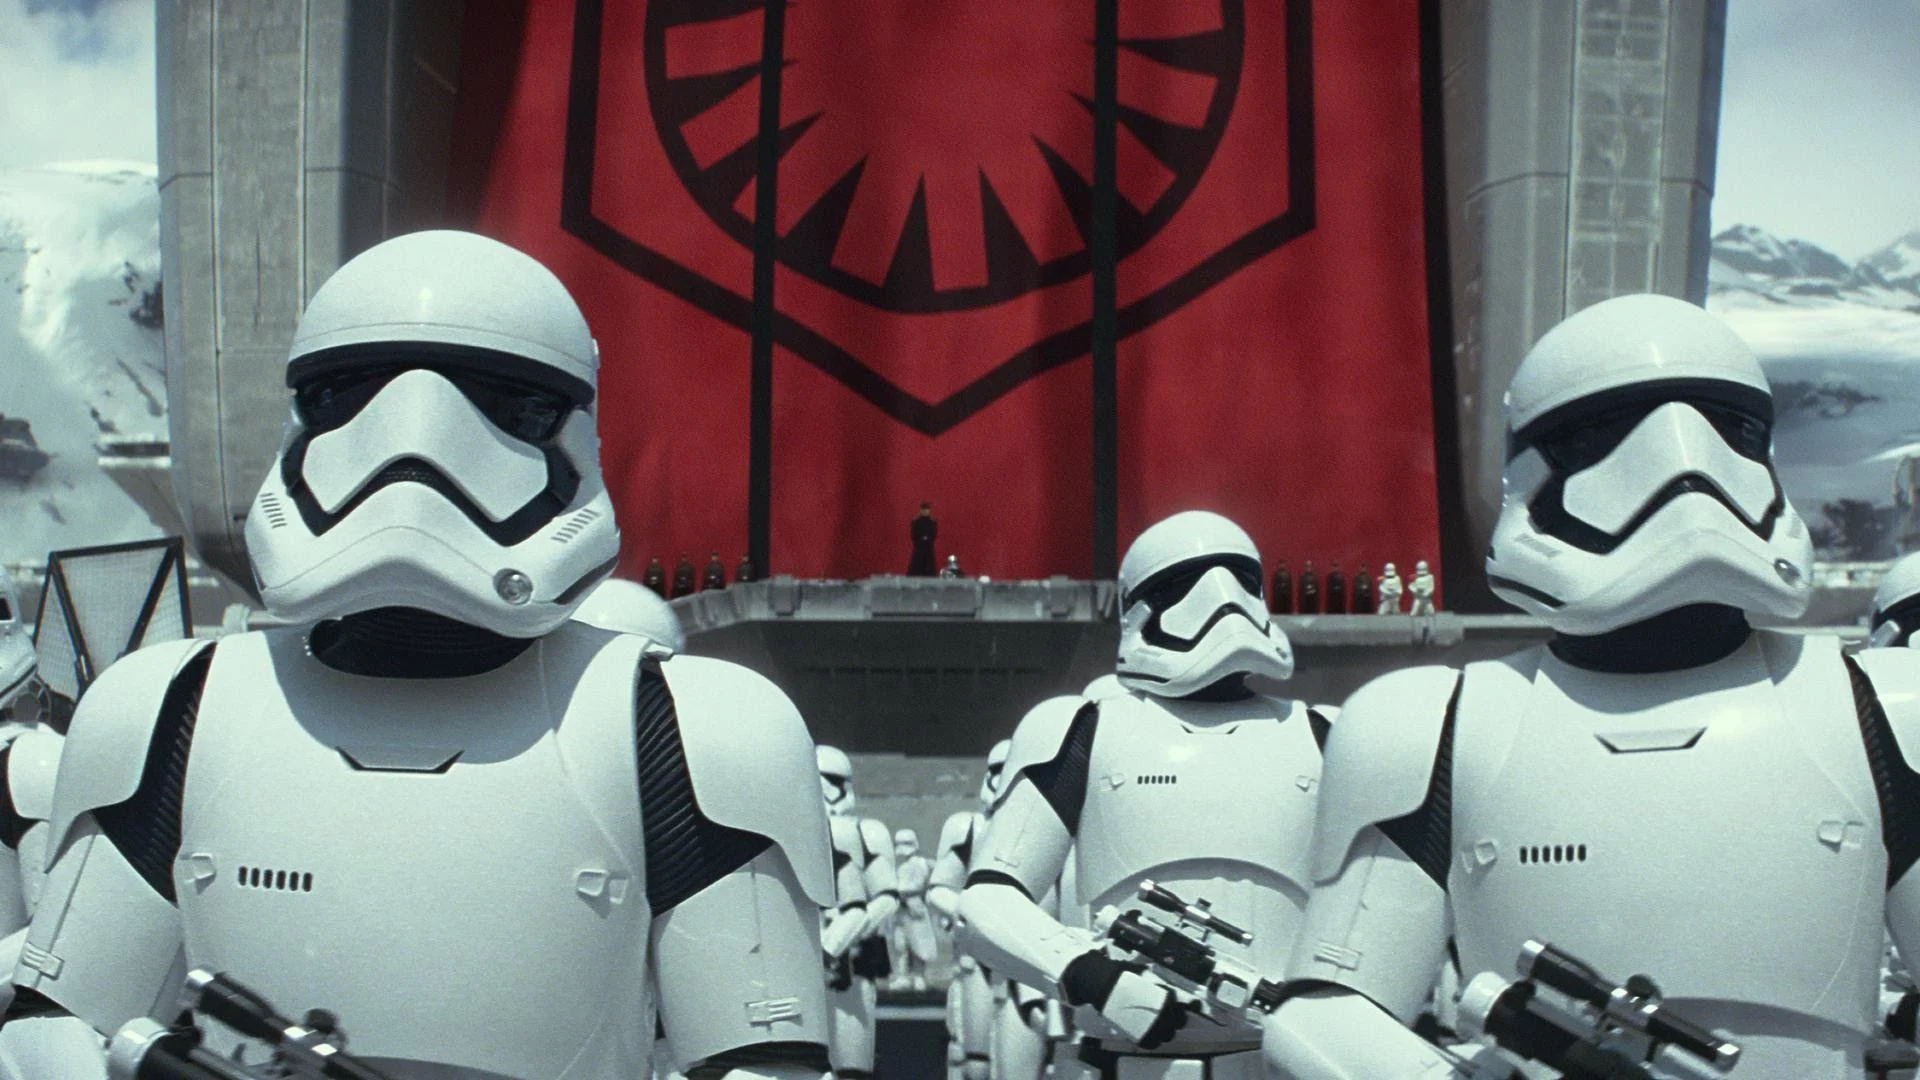 Storm Troopers in 1920x1080 resolution!